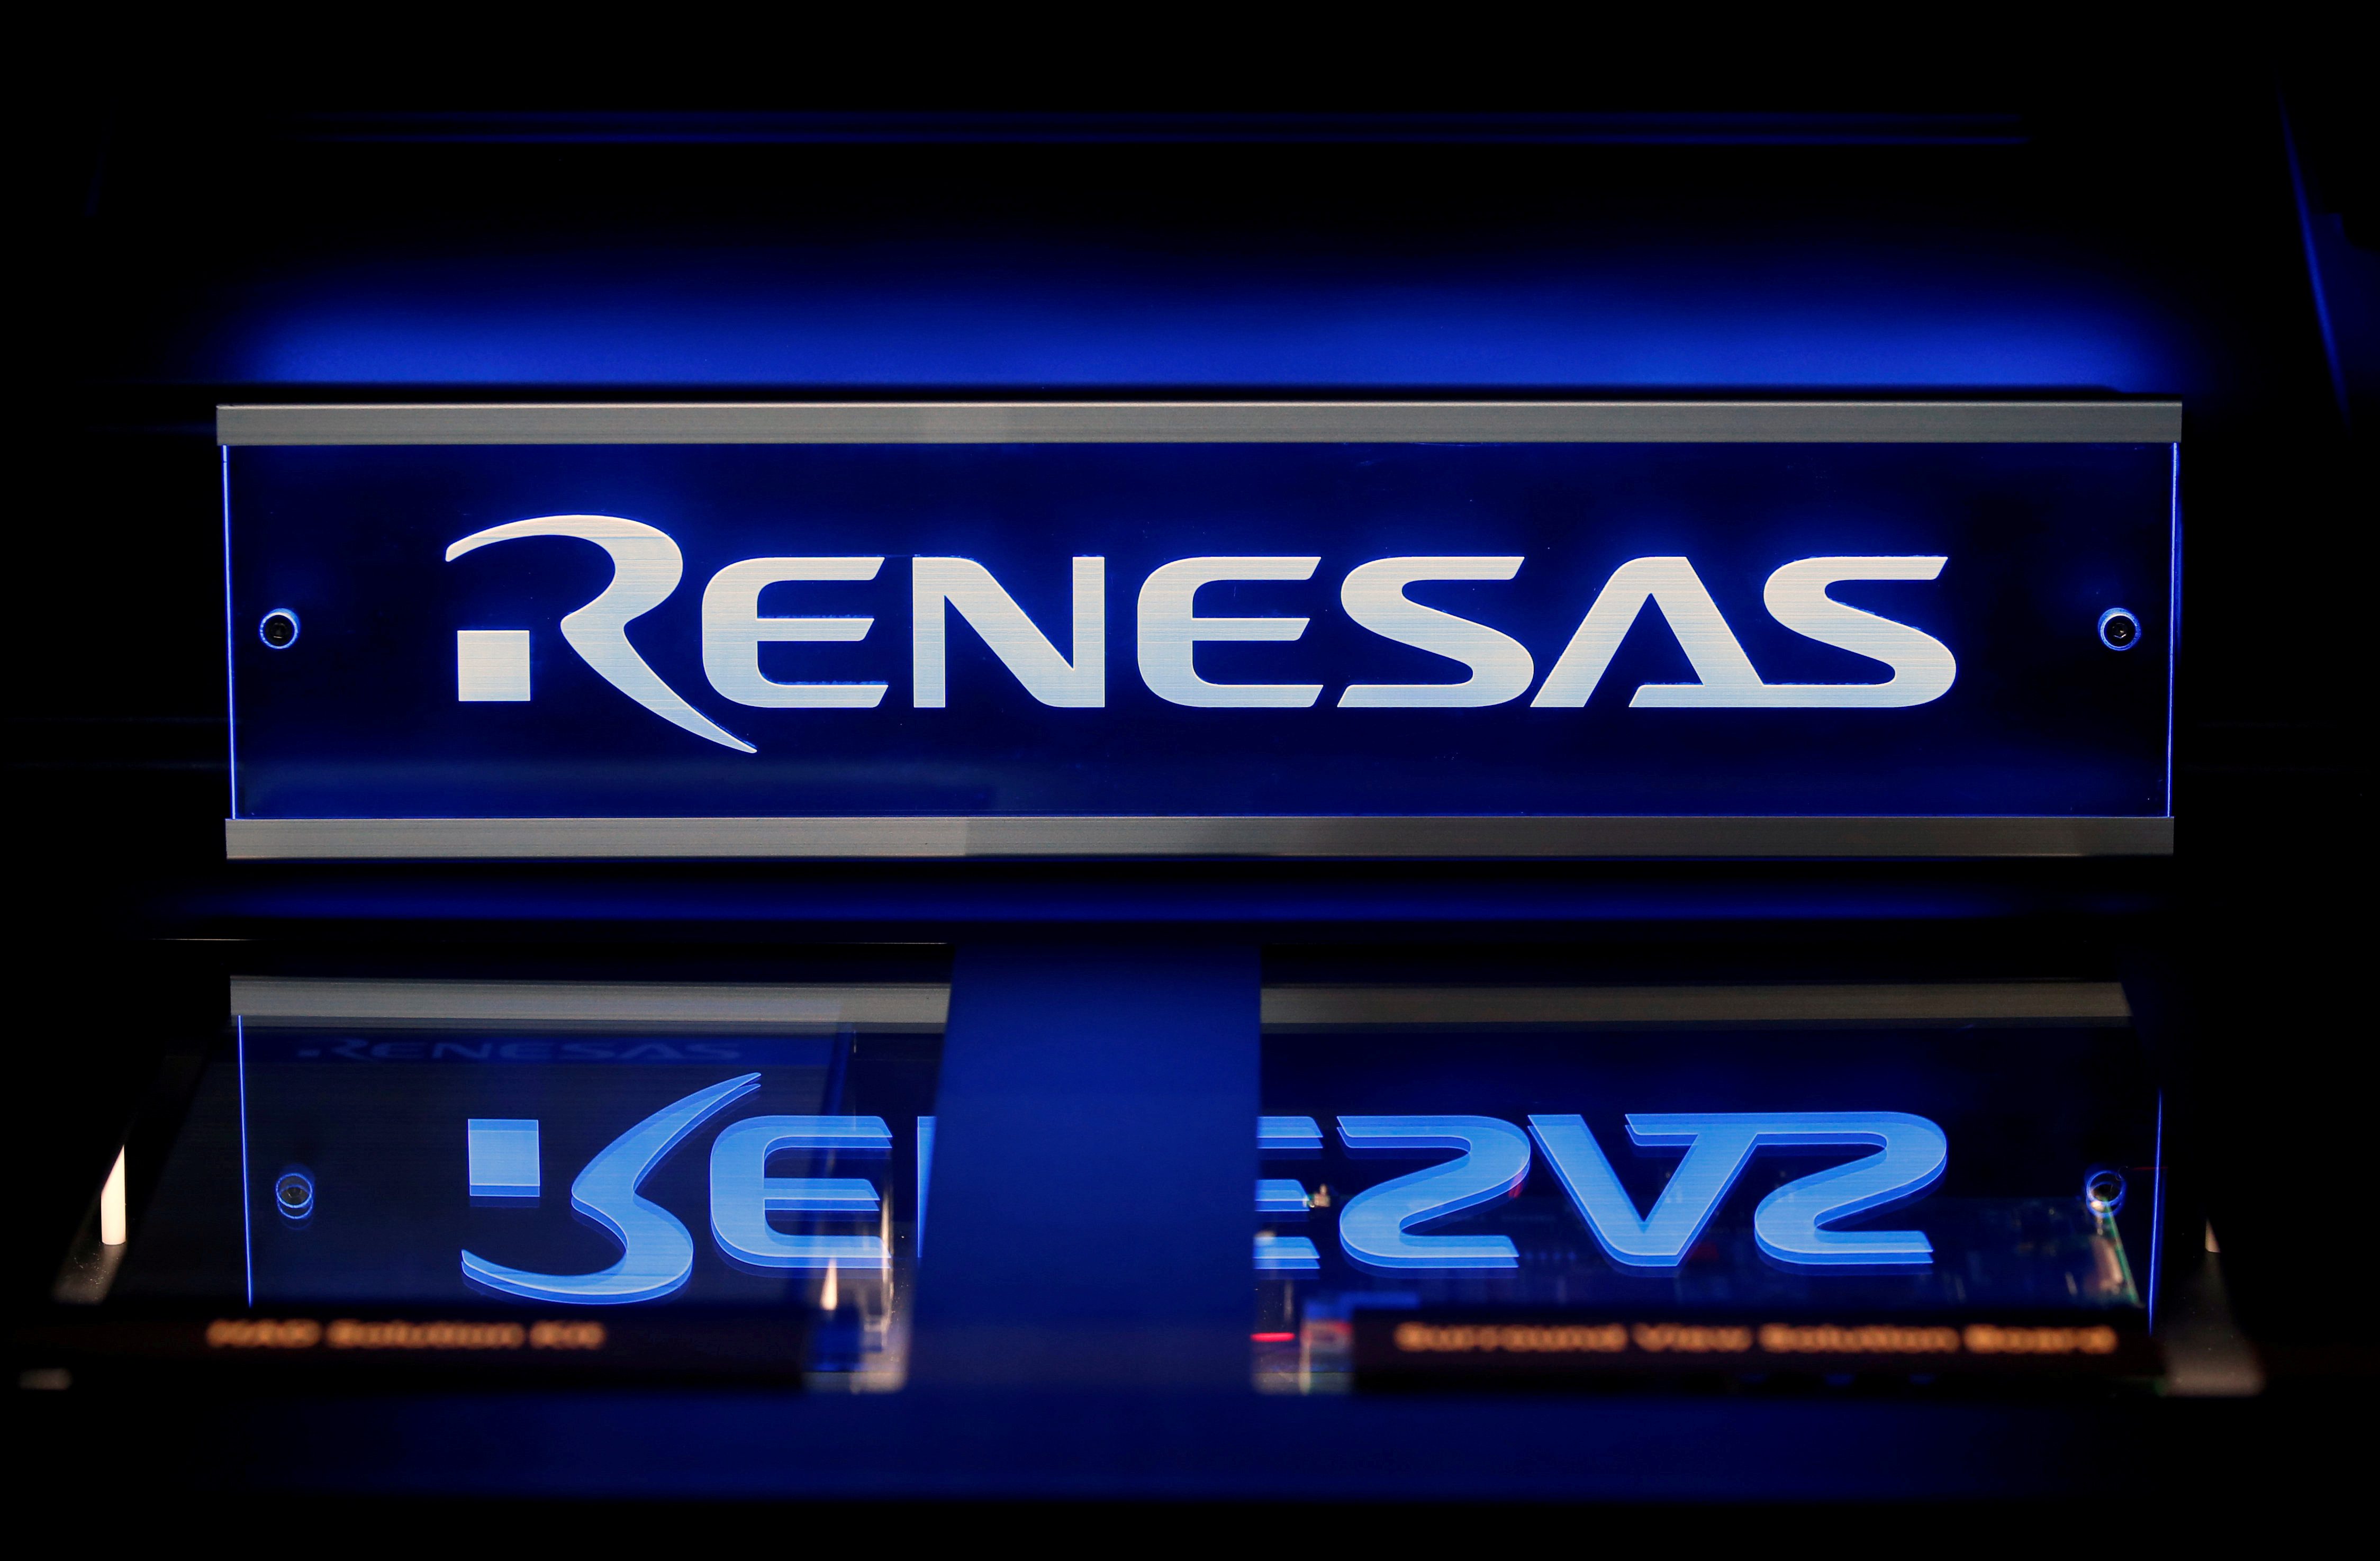 Japanese carmakers assess impact of fire at Renesas chip plant